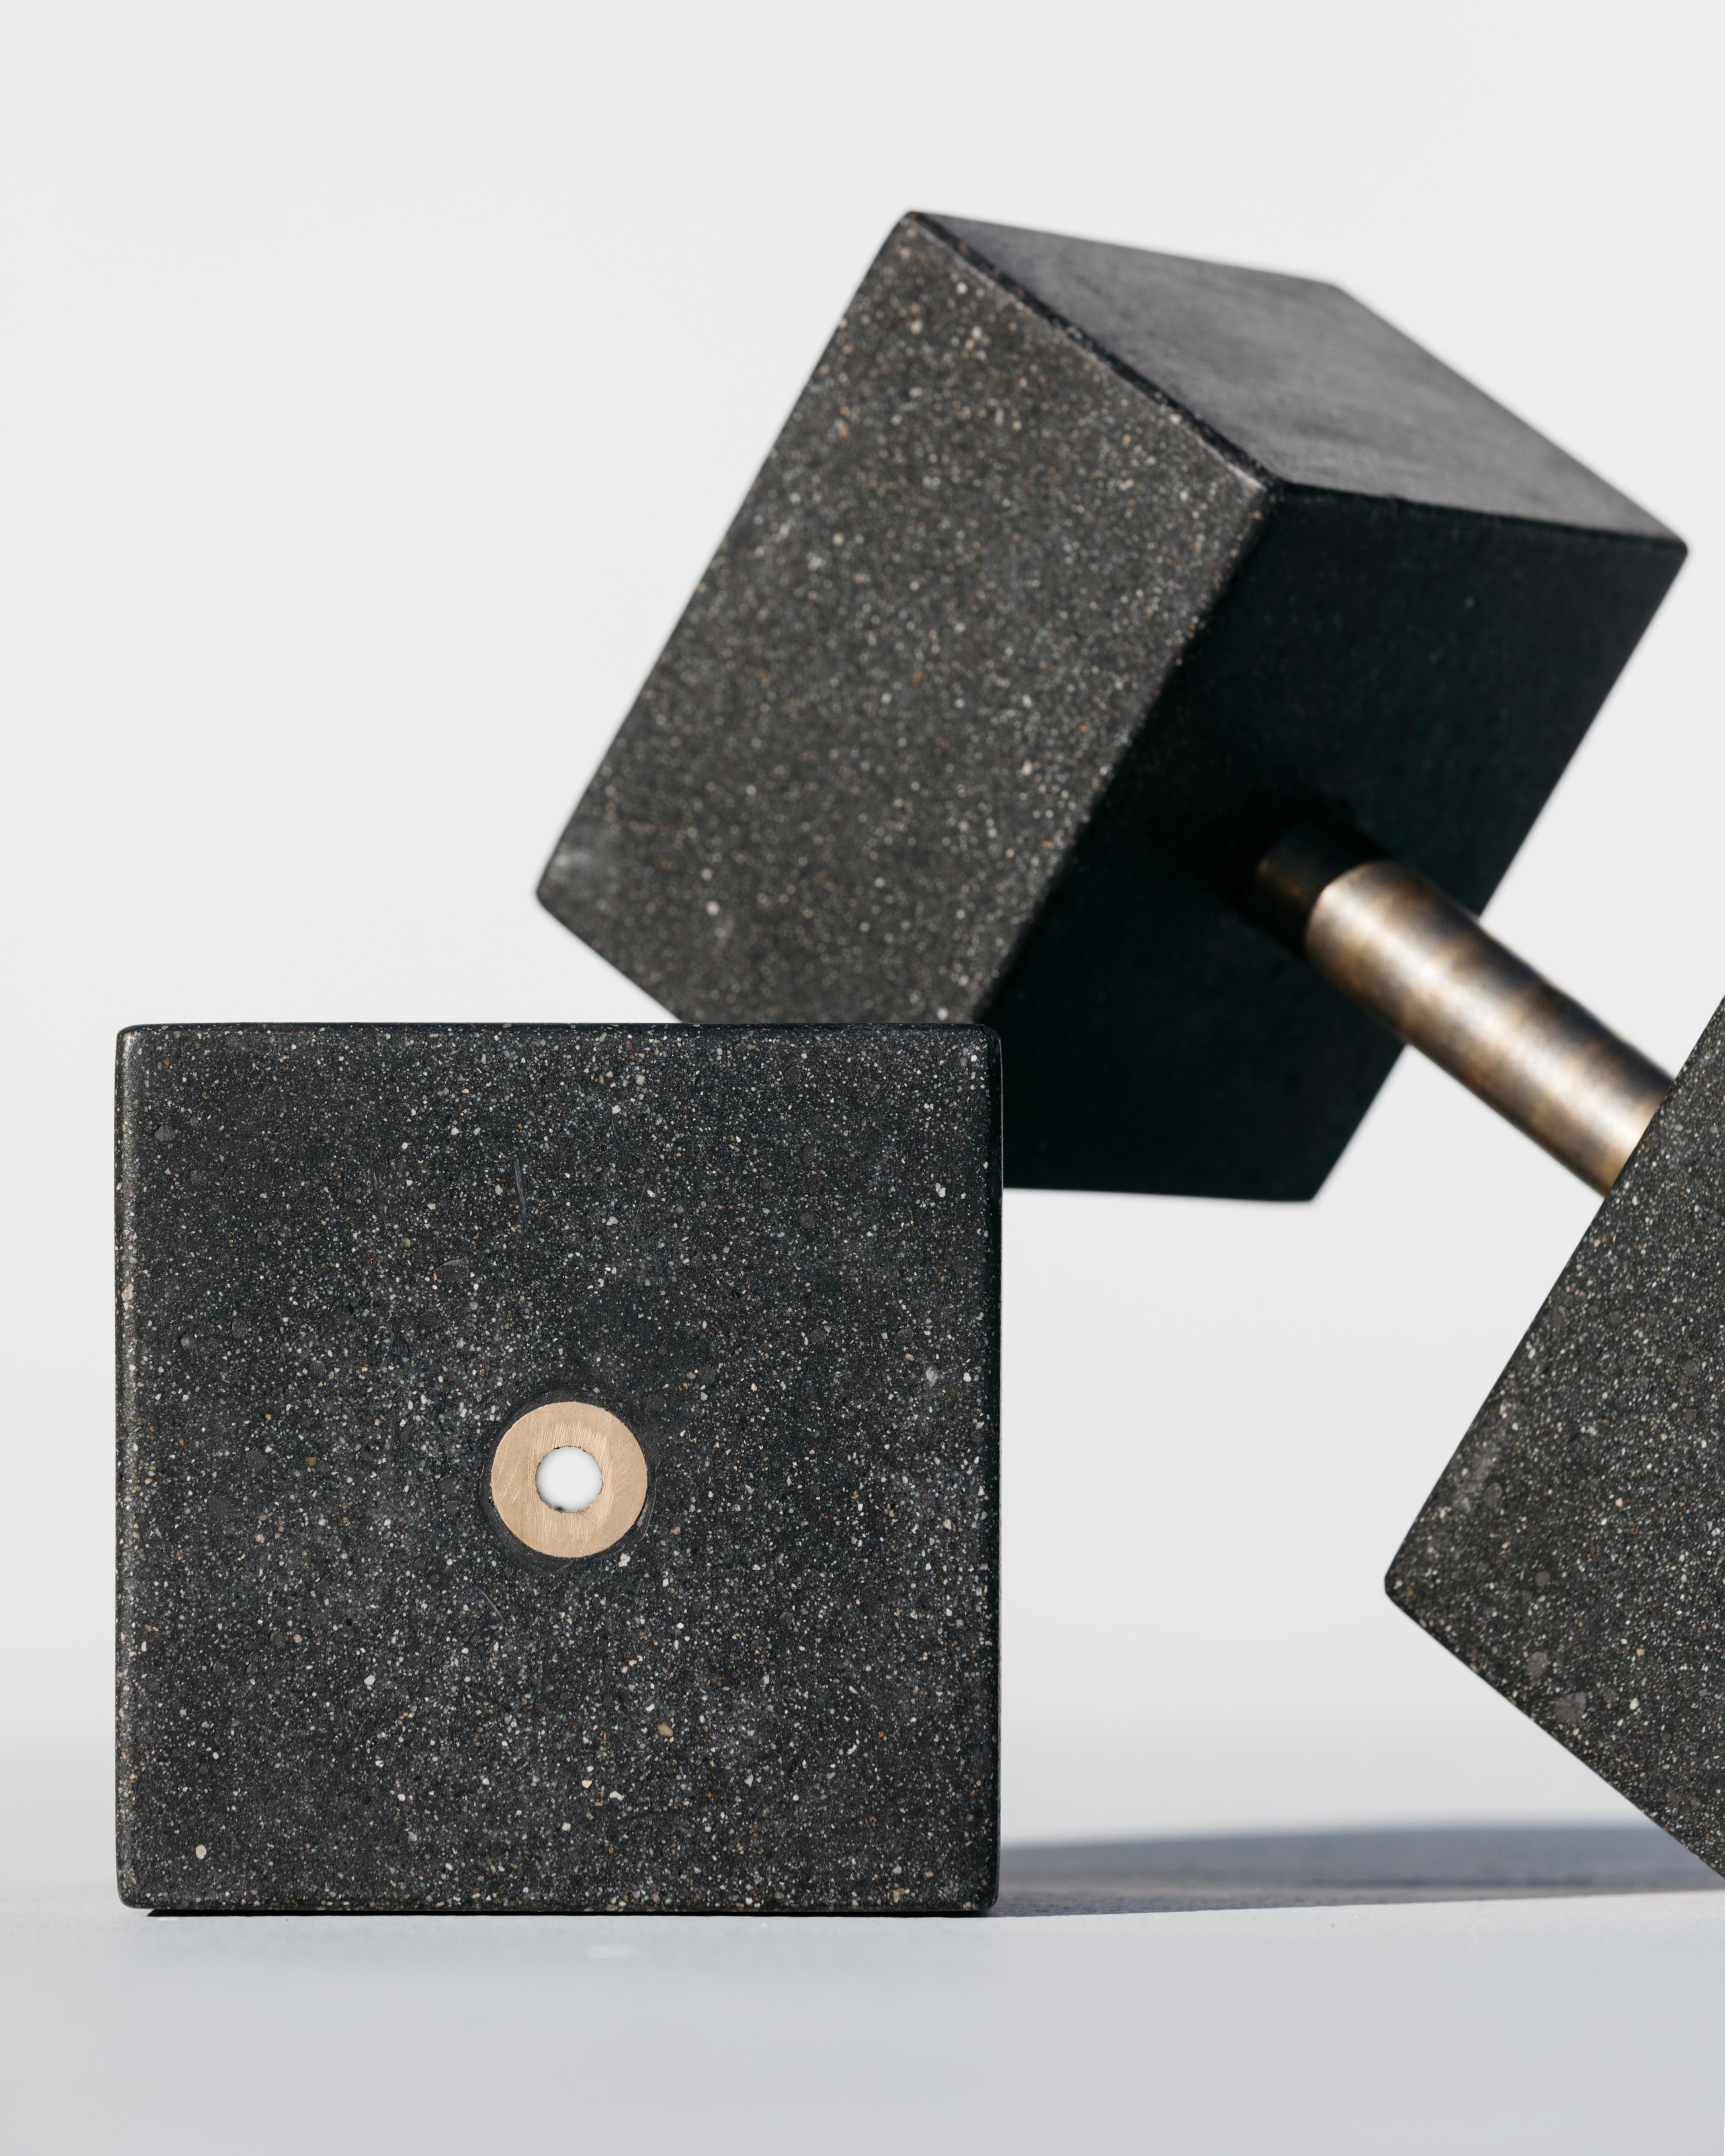 When concrete and bronze come together, it is a marriage of powerful aesthetic elements. Each weight is constructed of reinforced concrete, polished and sealed to a smooth, unique lustre. The bronze bar is exposed at the end of each block for a